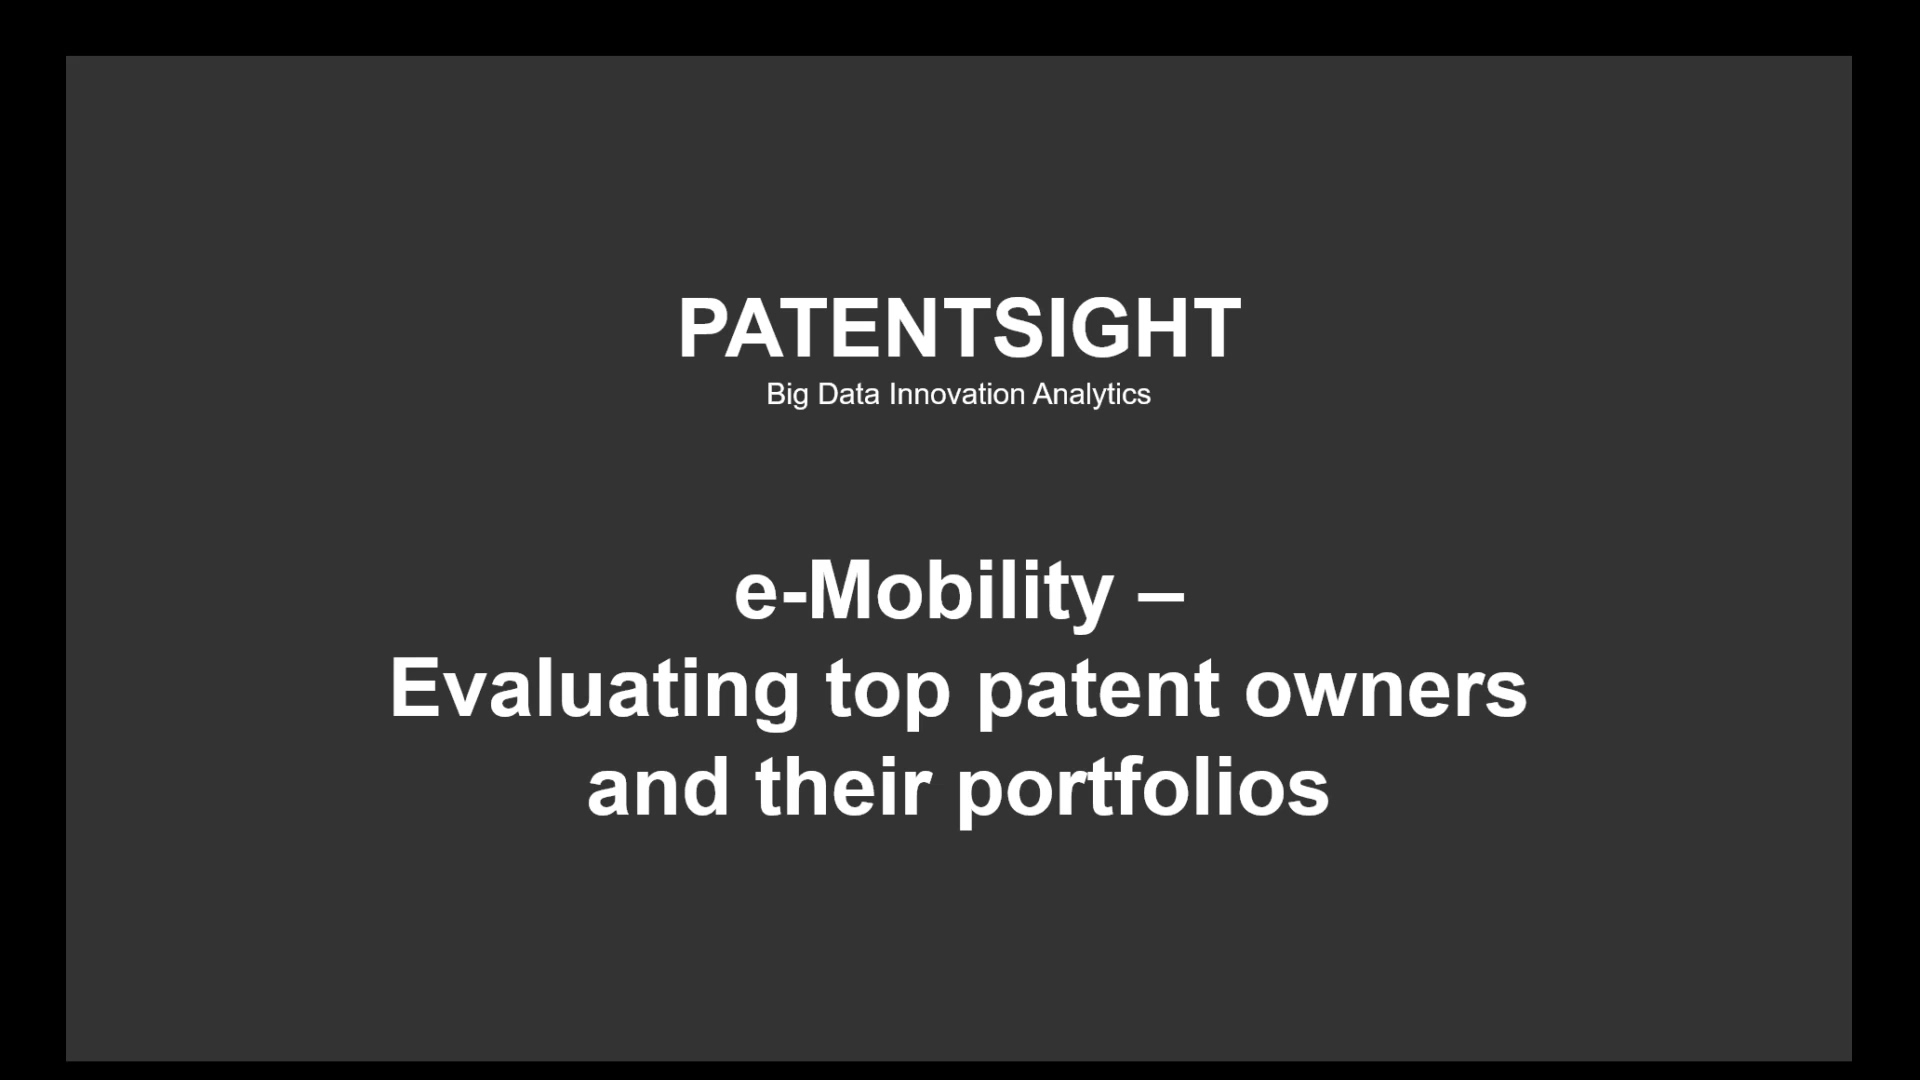 IP - PS - Leads Webinar - e-Mobility - Evaluating top patent owners and their portfolios